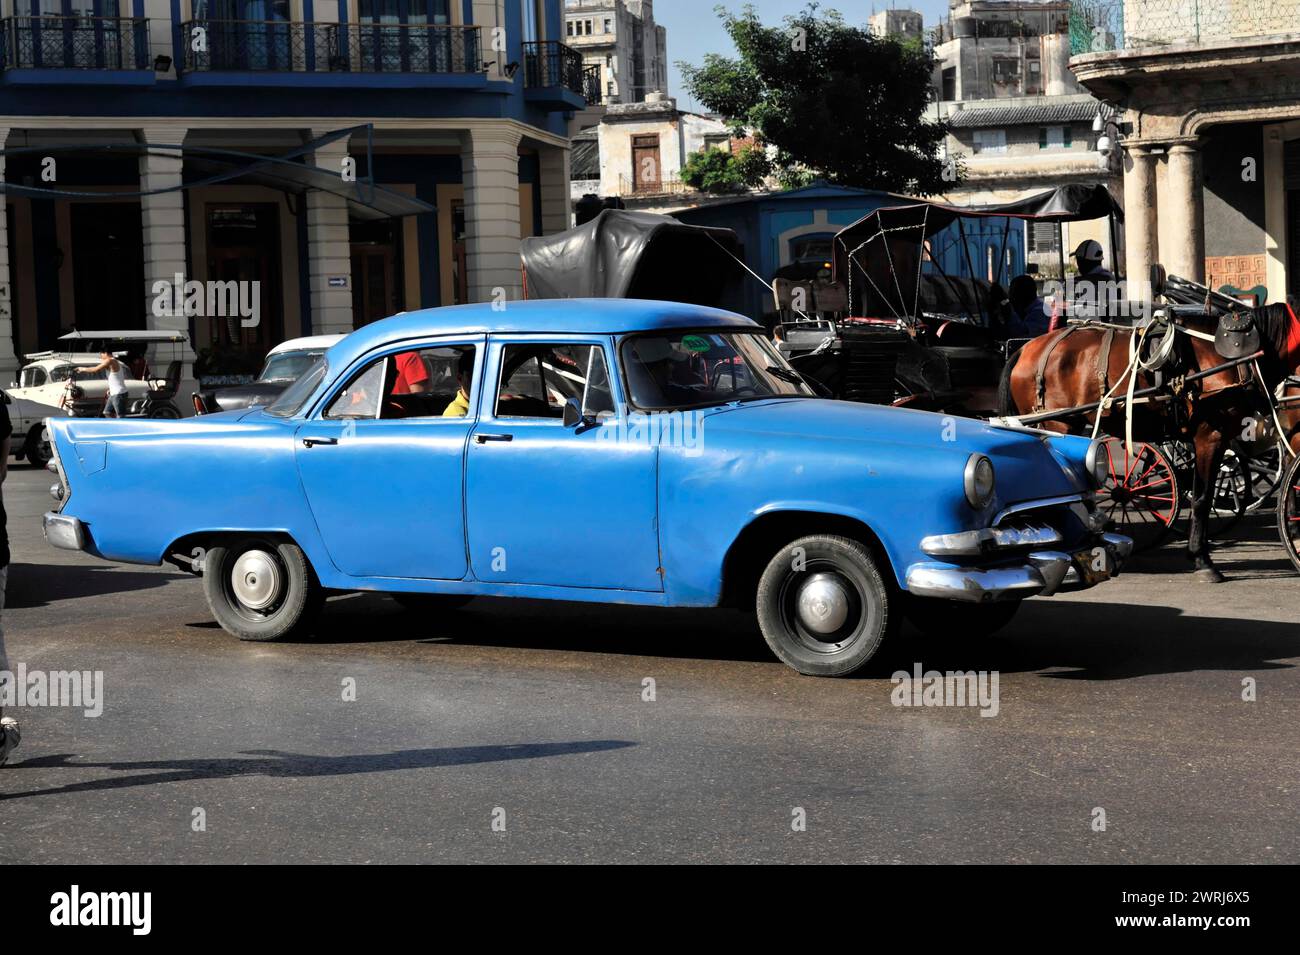 Classic blue car drives past horse-drawn carriages on city street, Havana, Cuba, Central America Stock Photo